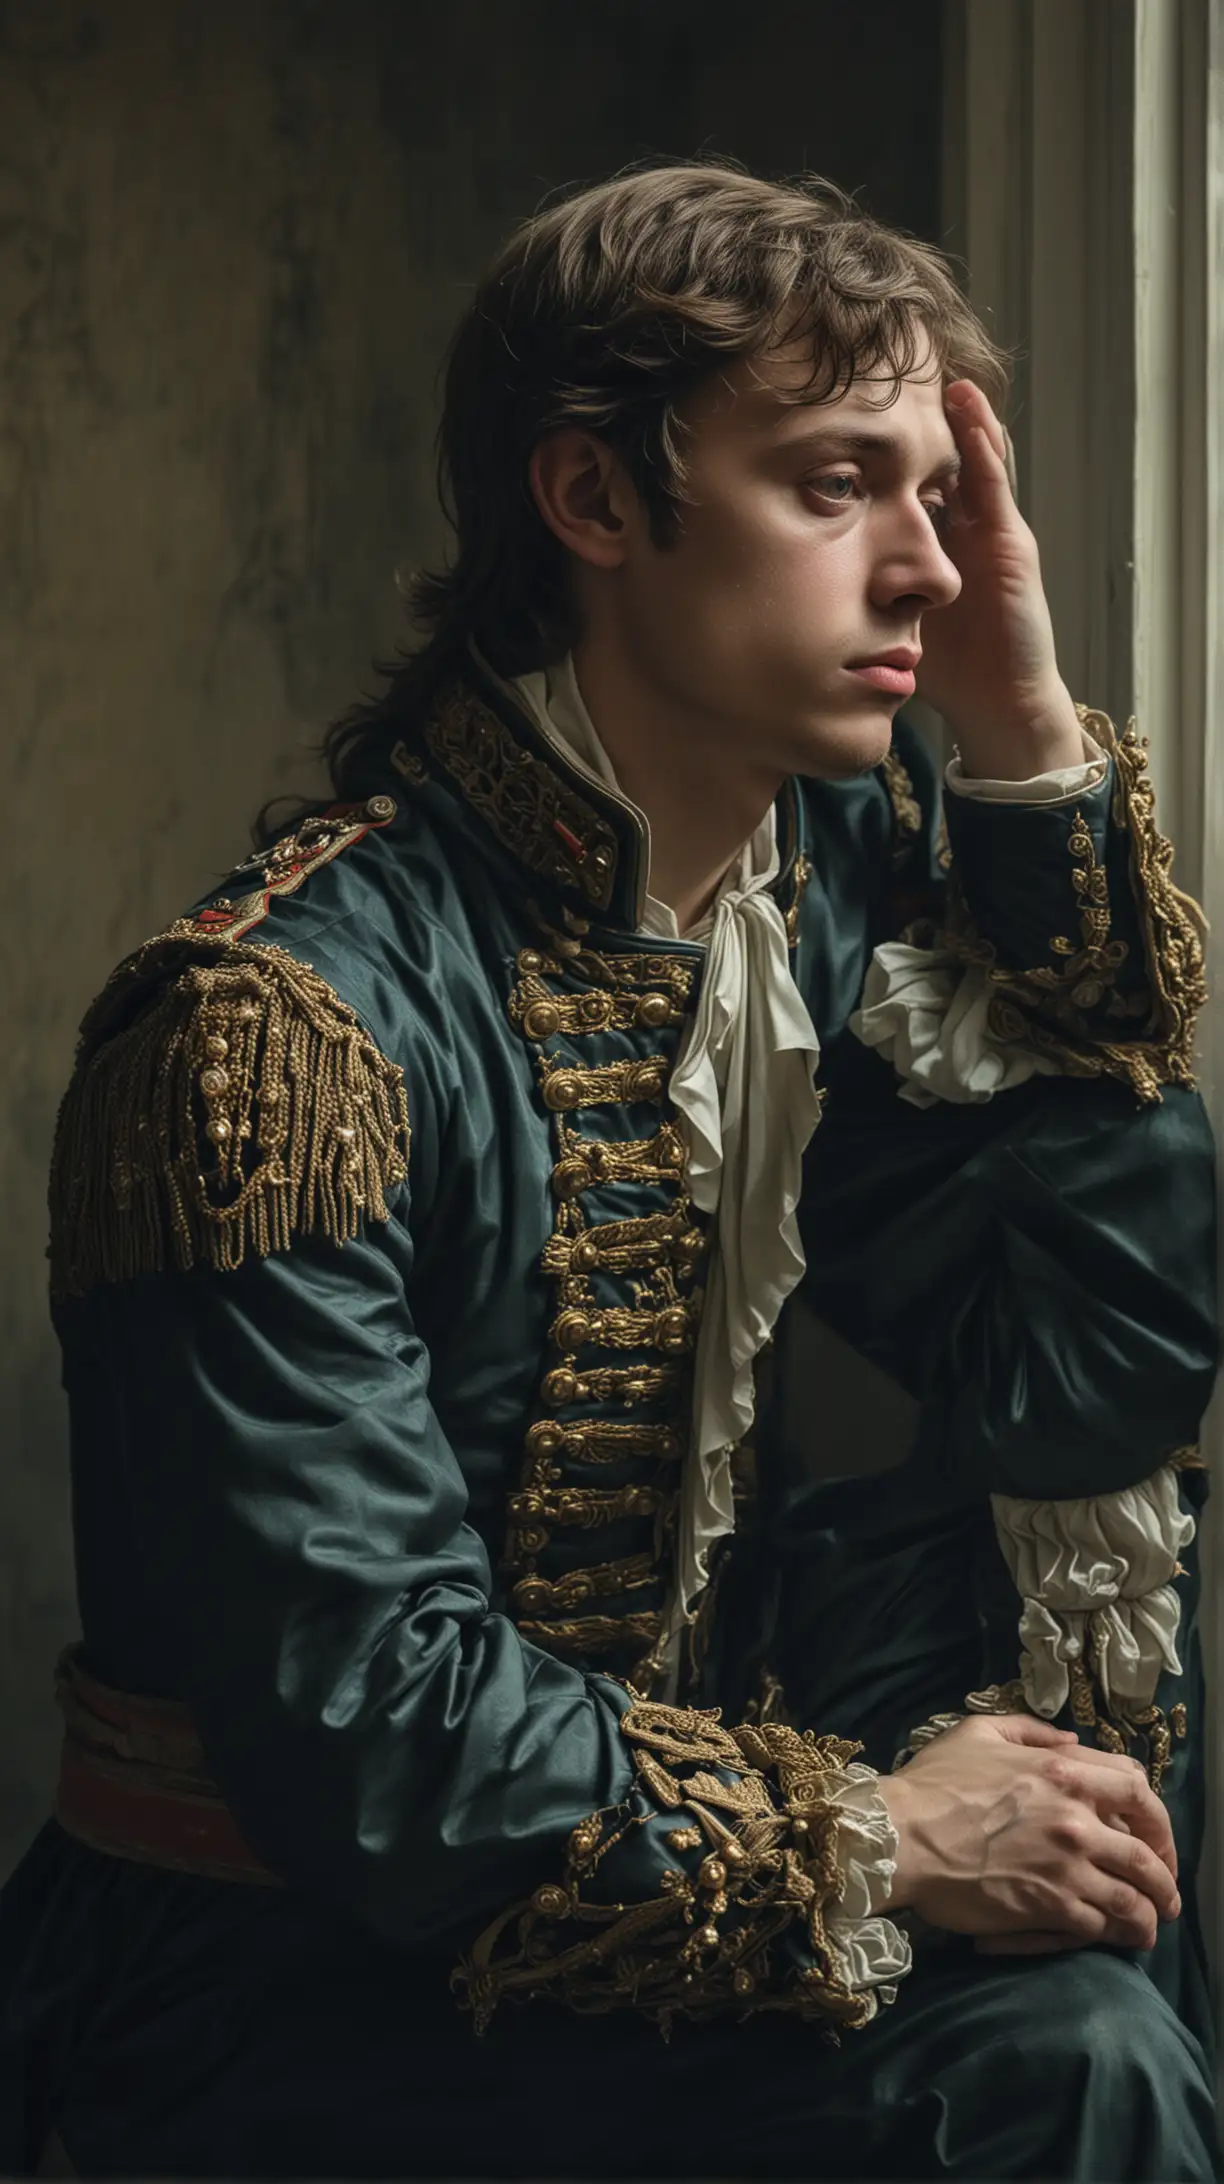 Alexei Neglected Son of Peter the Great Portrait of Abandonment and Disillusionment